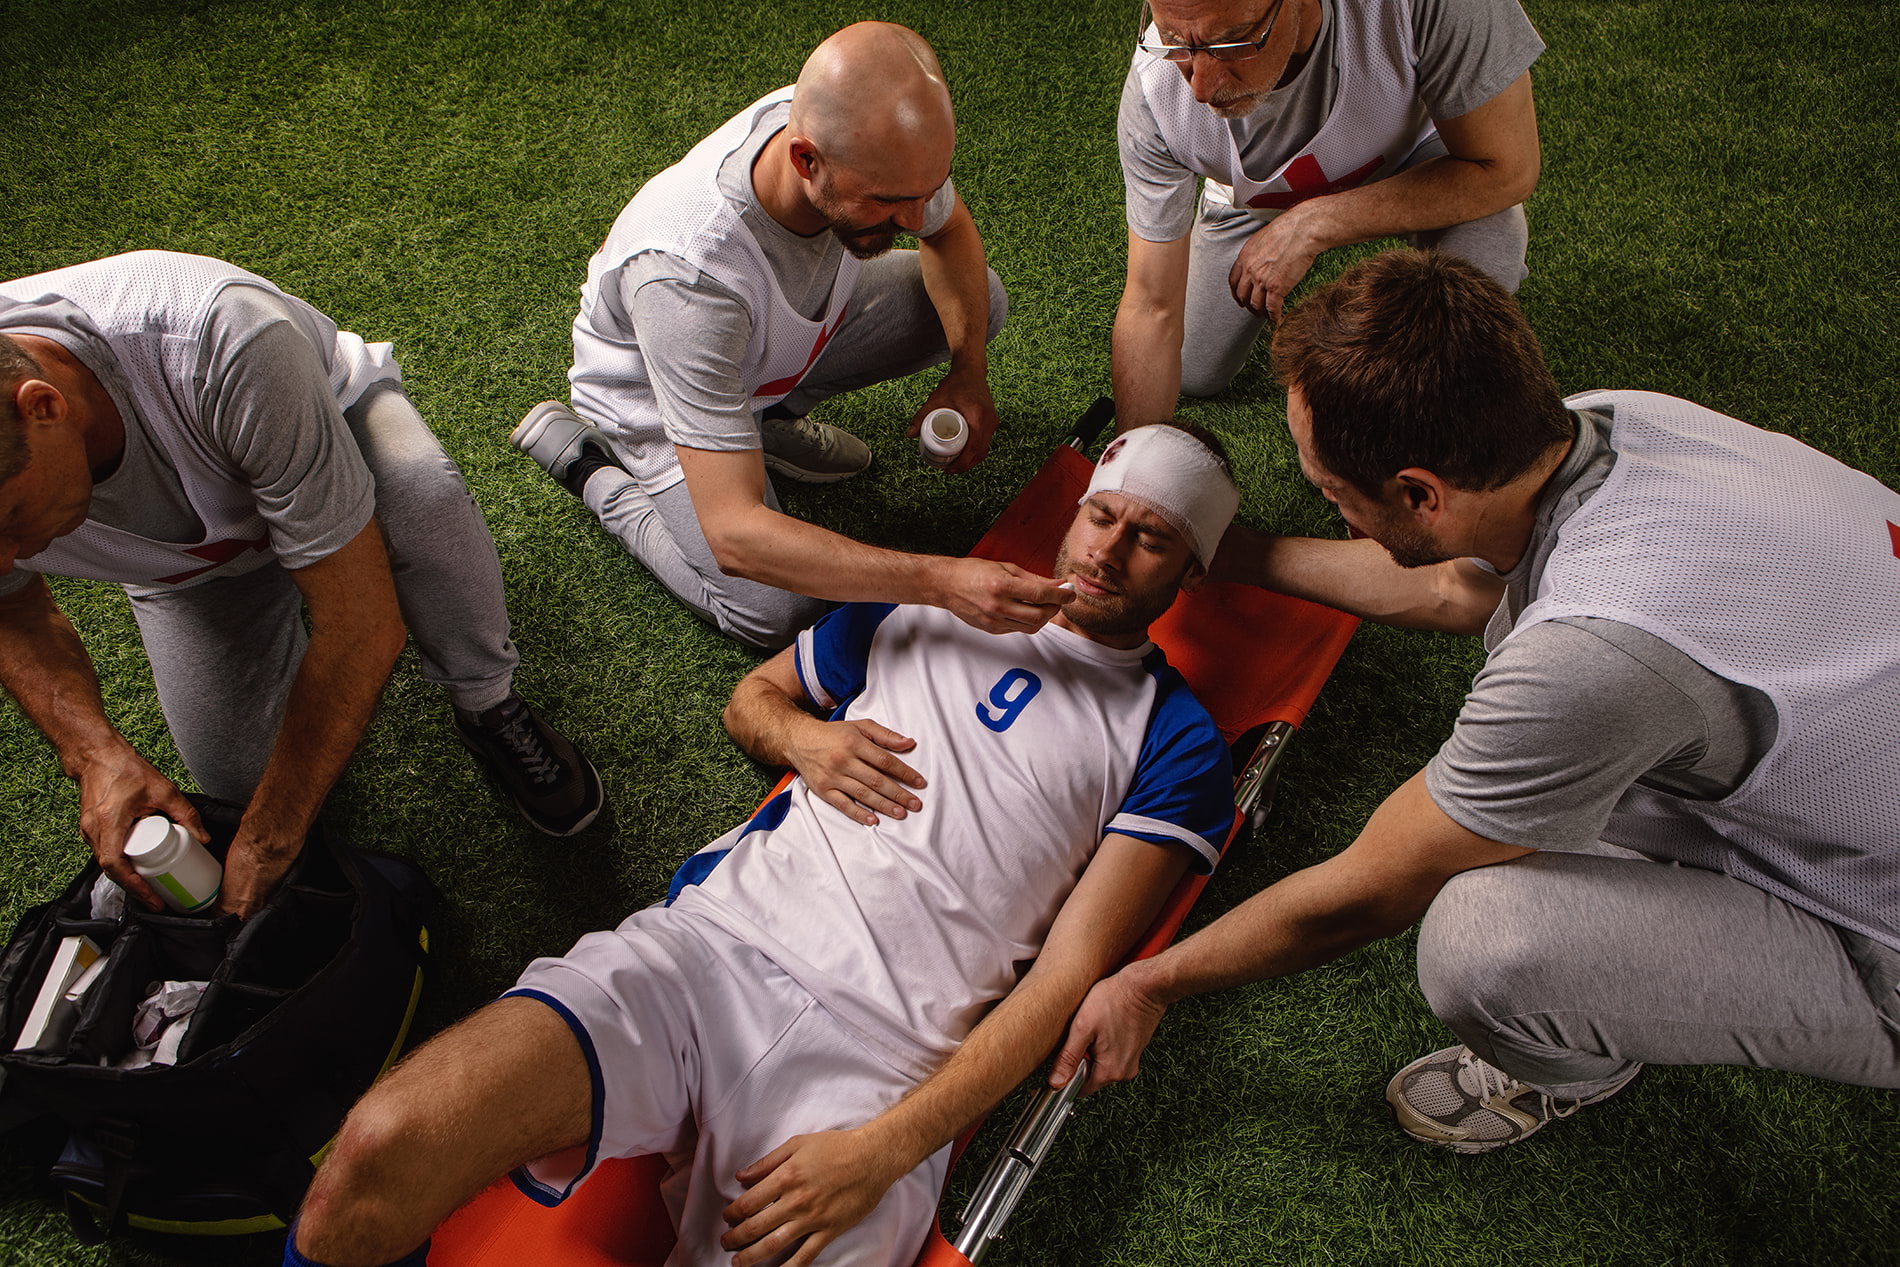 Soccer player down on field on stretcher suffering from a head sports injury.